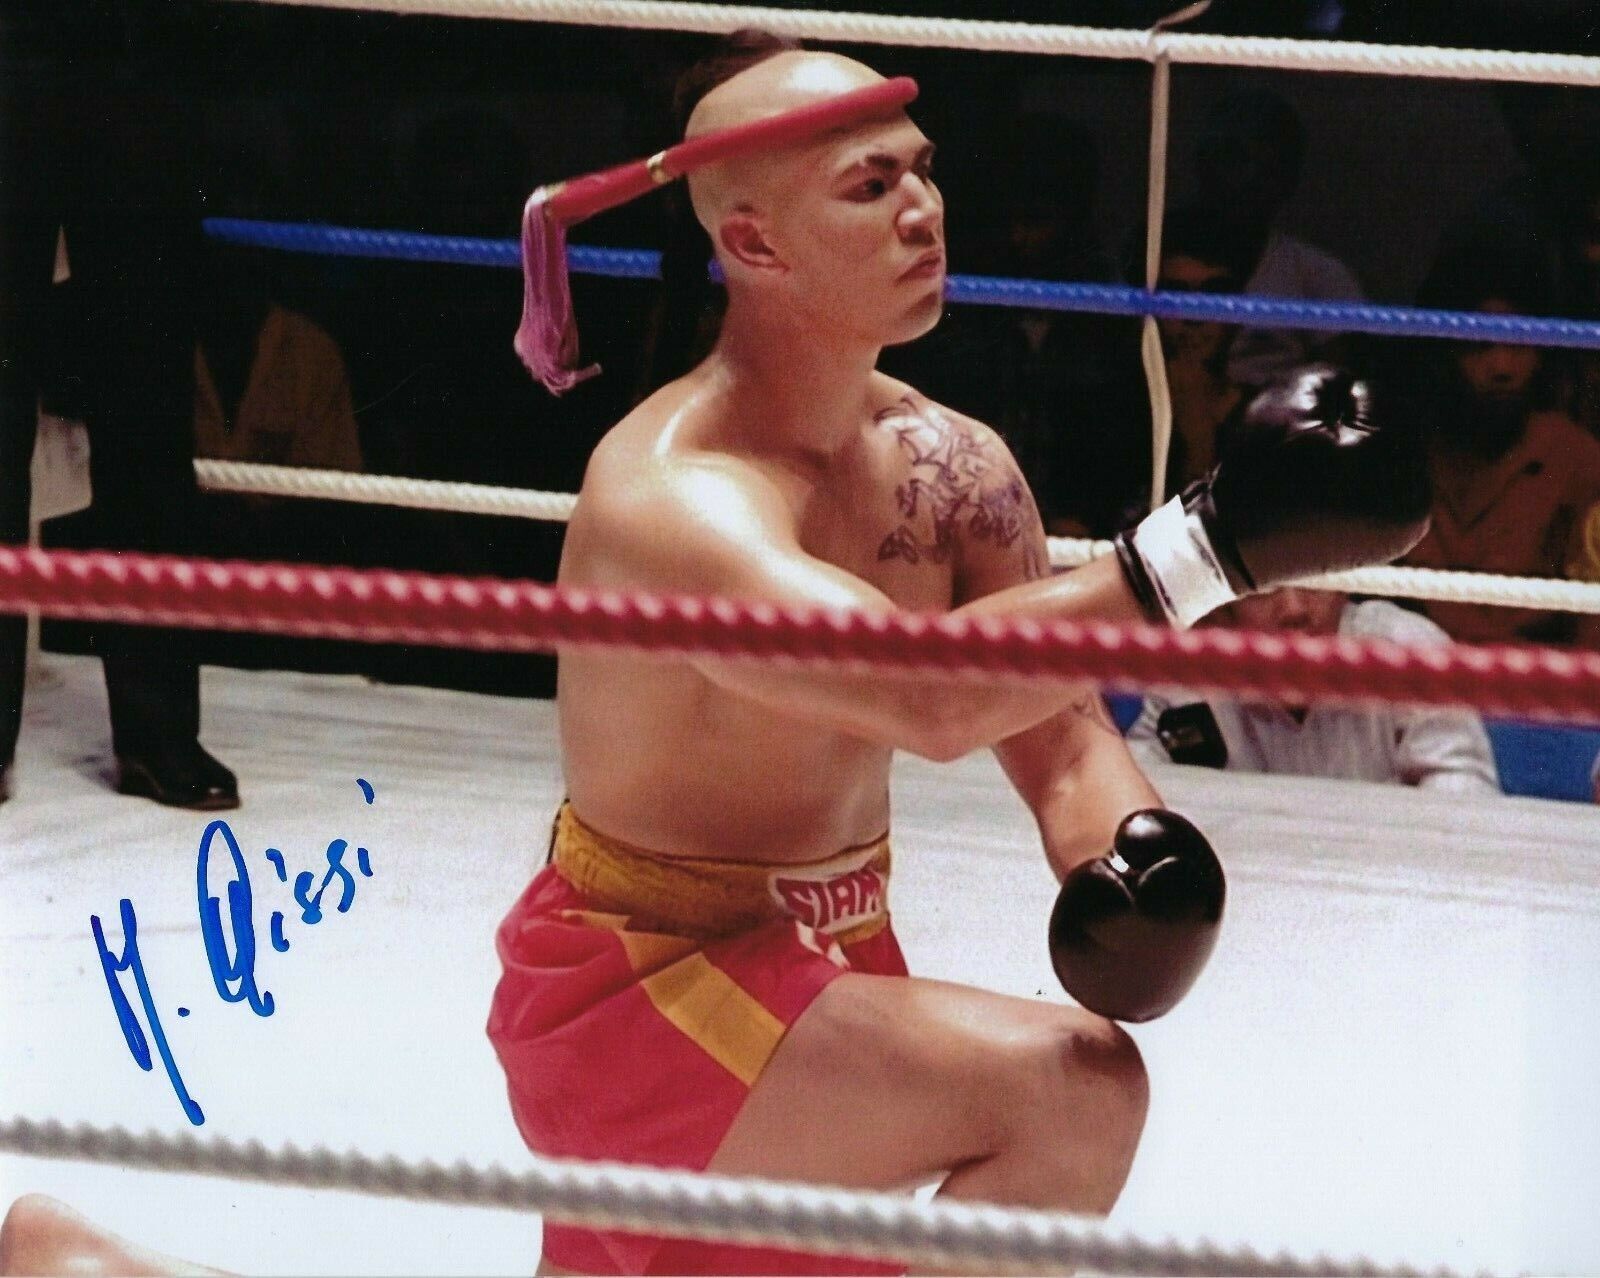 GFA Kickboxer Movie 2 Tong Po * MICHEL QISSI * Signed 8x10 Photo Poster painting PROOF MH7 COA